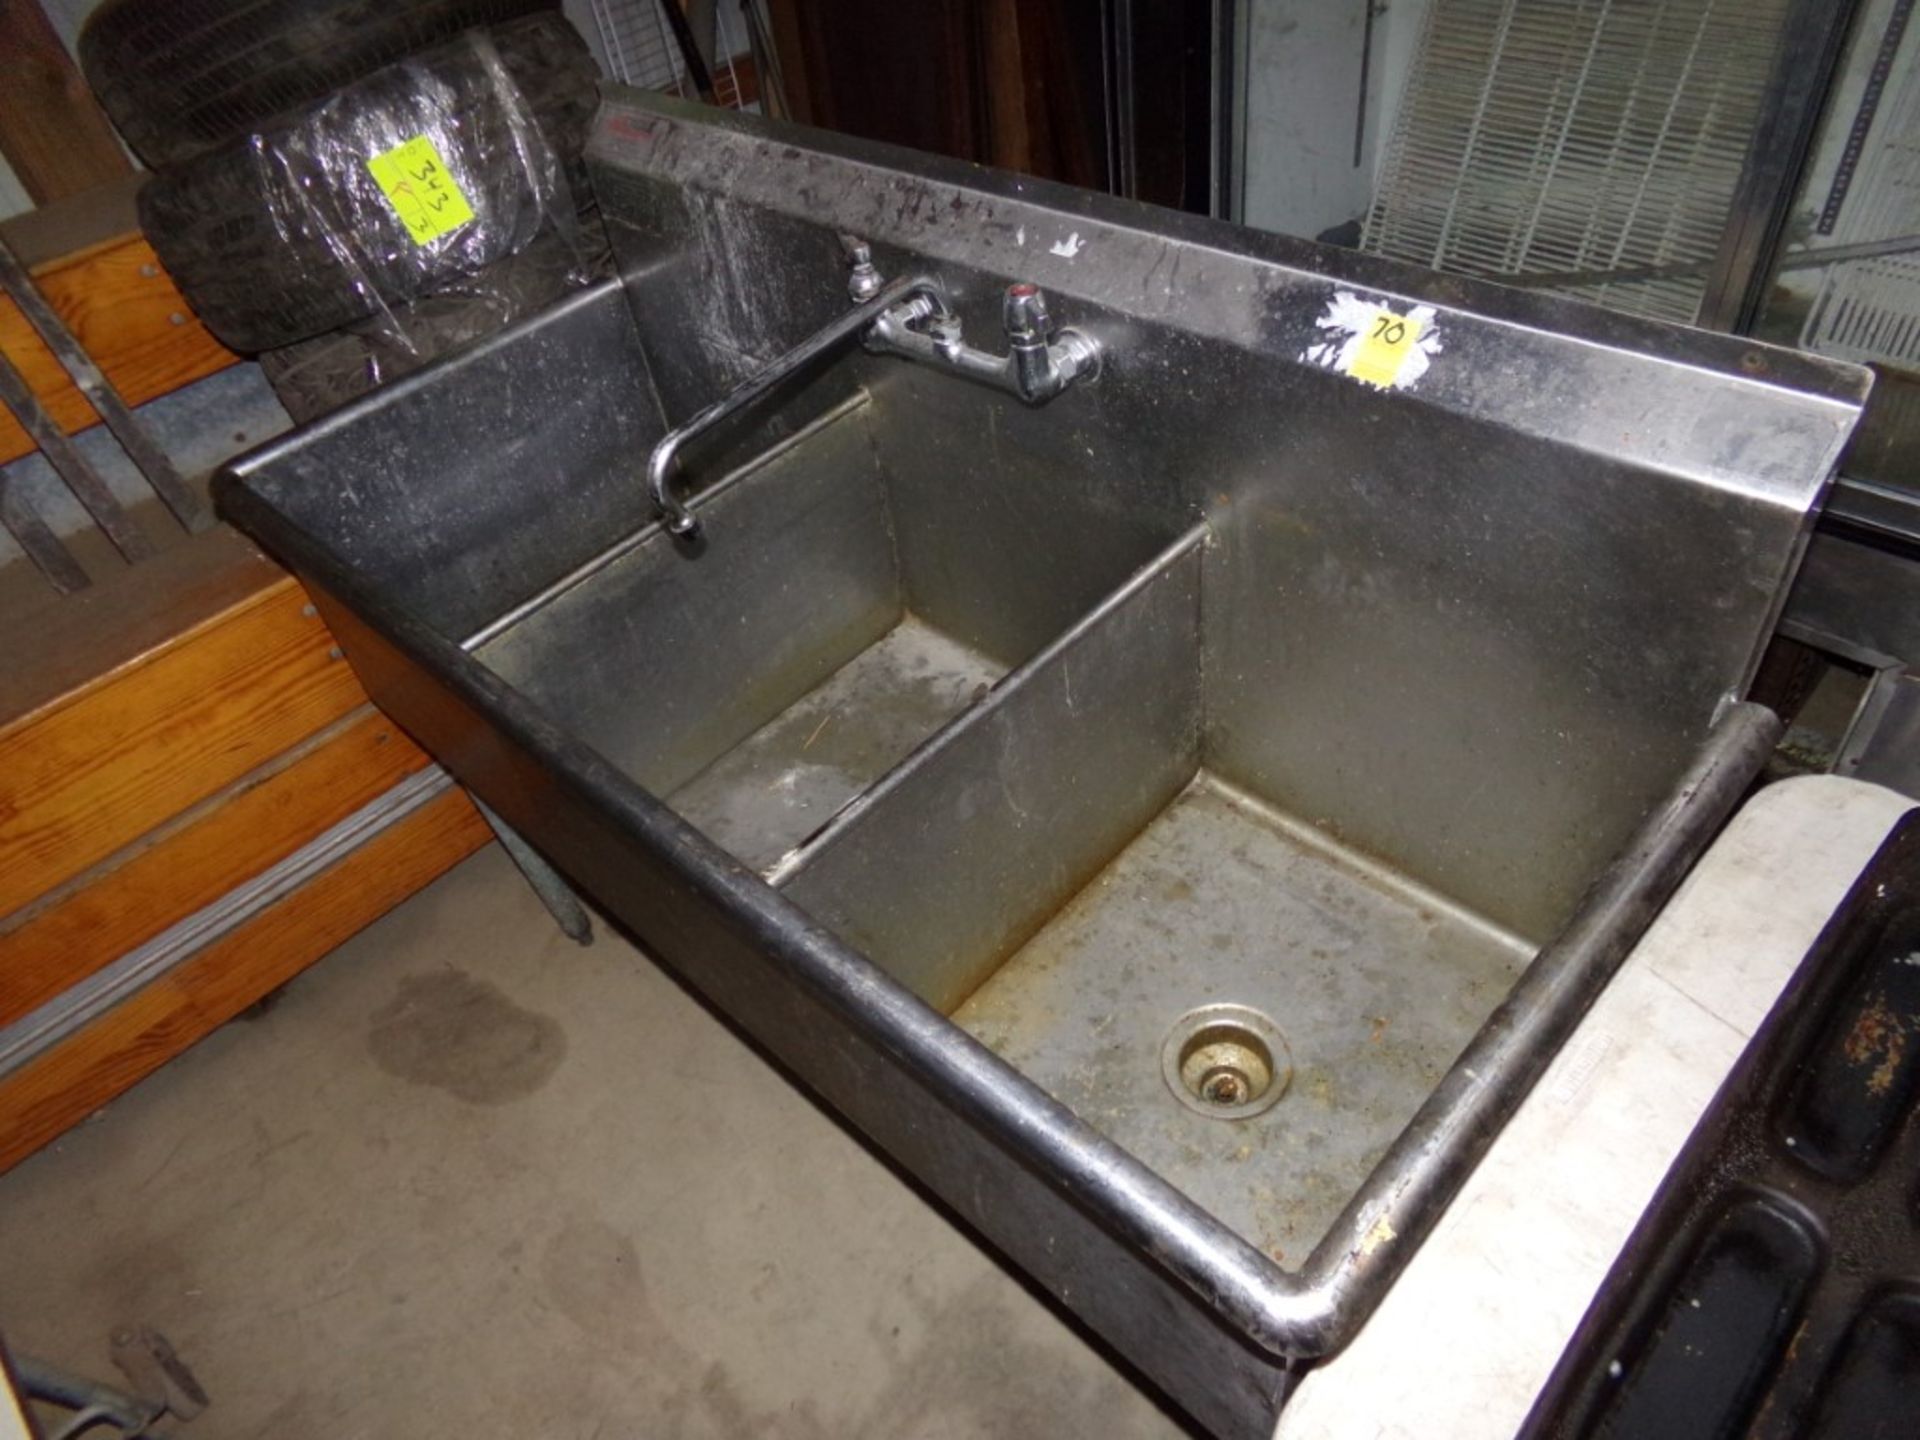 Stainless Steel 3 Bay Sink, 57'' X 25'' X 44'' With Faucet and Drains. (LEGS ARE LOOSE)